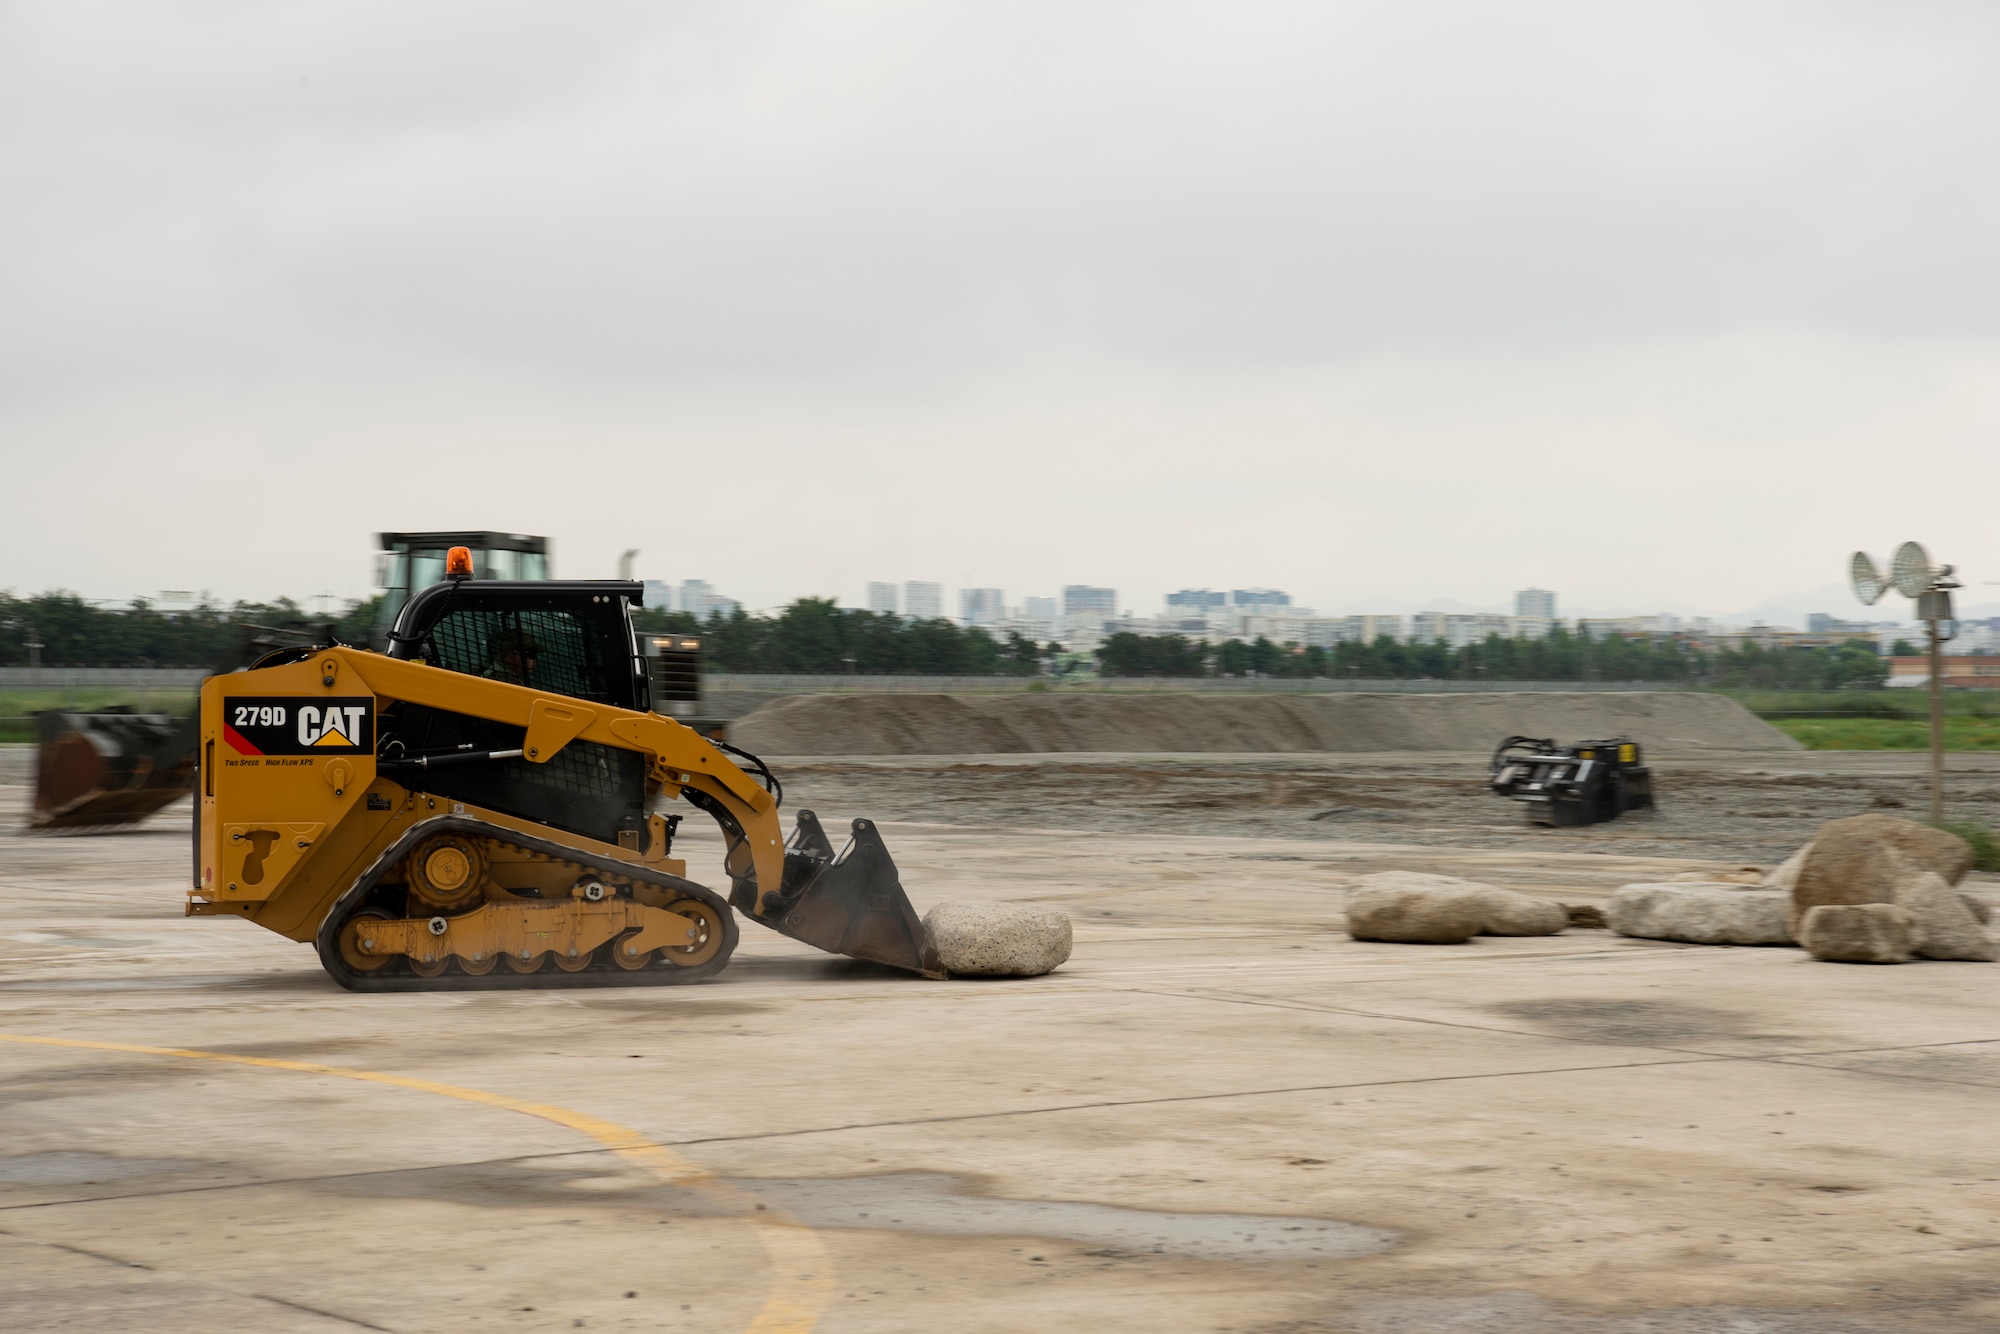 A U.S. Air Force (USAF) Civil Engineer Airman uses a Compact Track Loader with bucket attachment to clear debris during a rapid airfield damage repair training, July 19, 2022 at Gwangju Air Base, Republic of Korea.